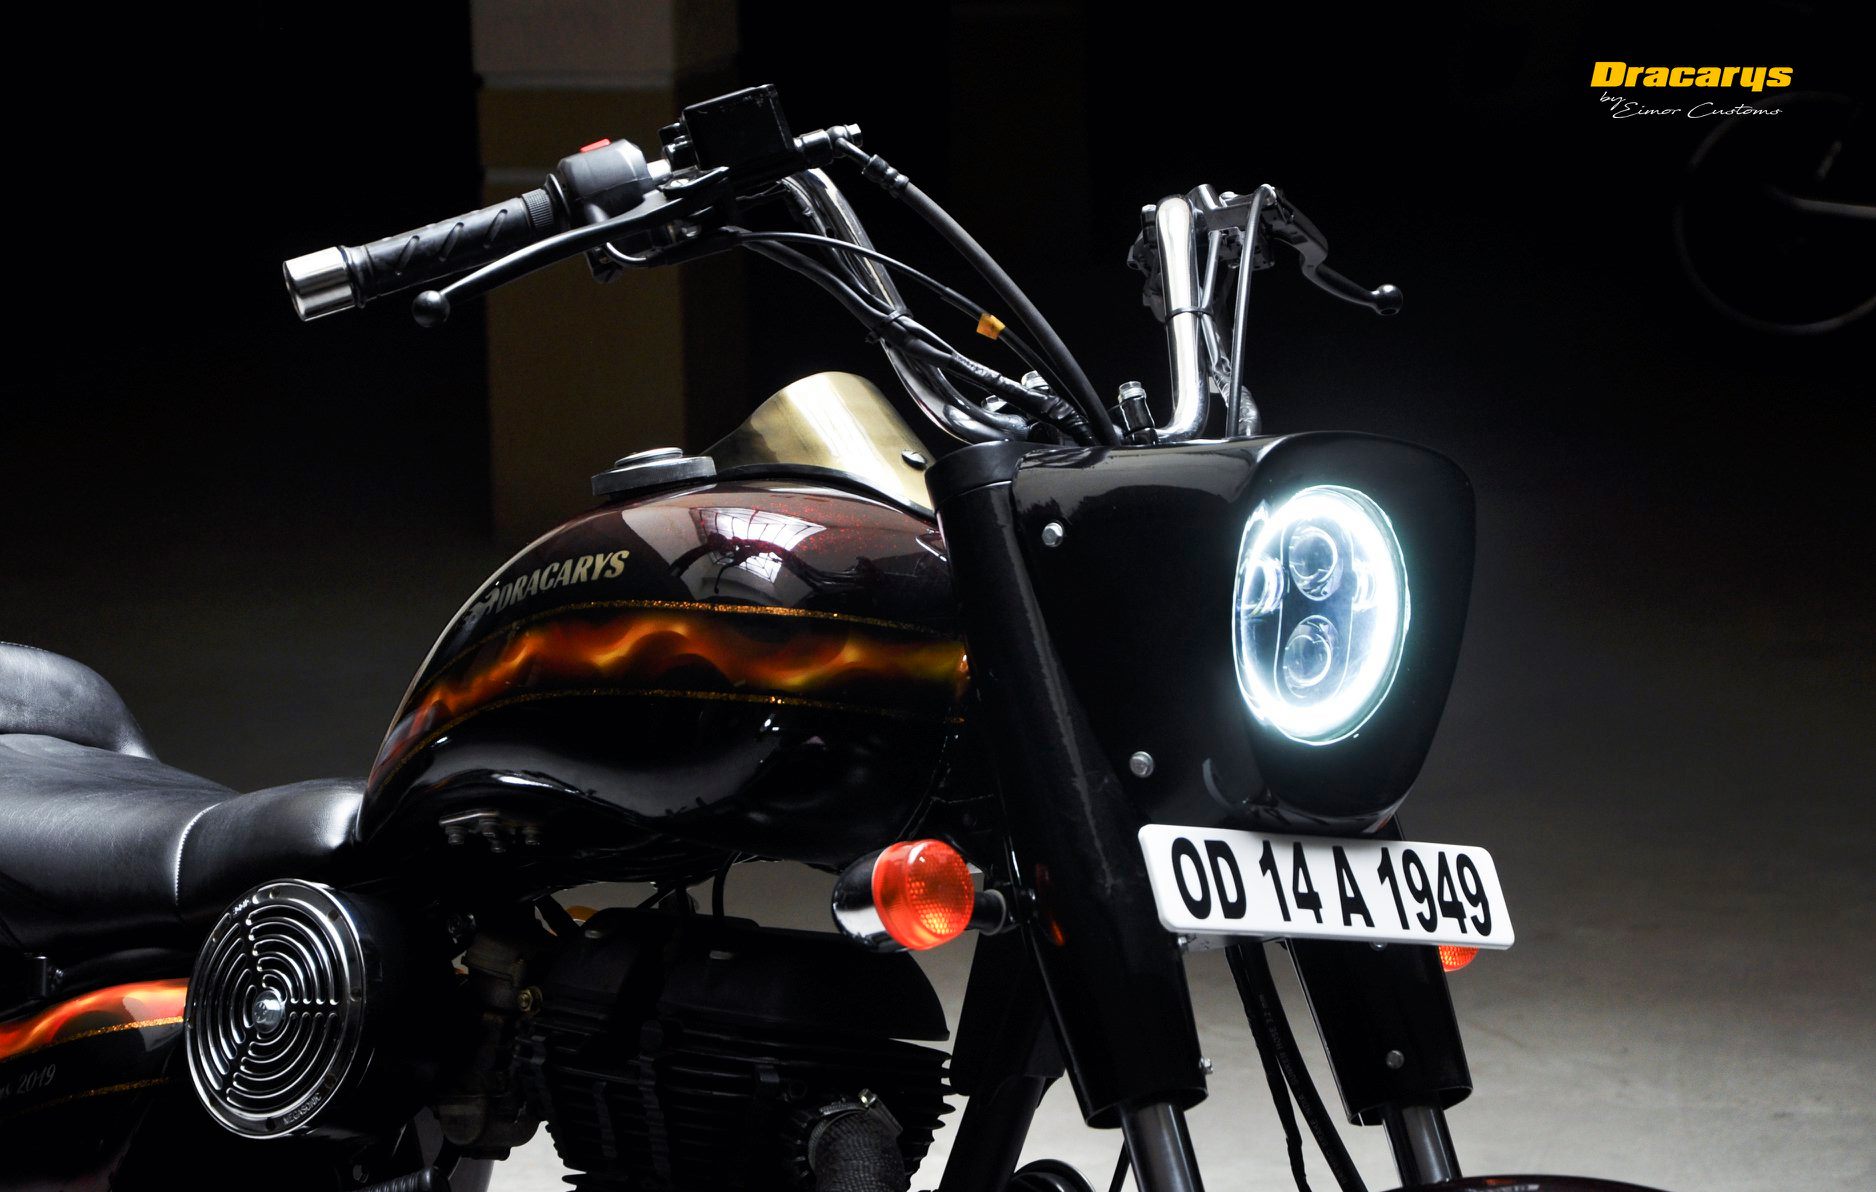 Royal Enfield Bullet 'Dracarys' Special Edition Details and Photos - foreground